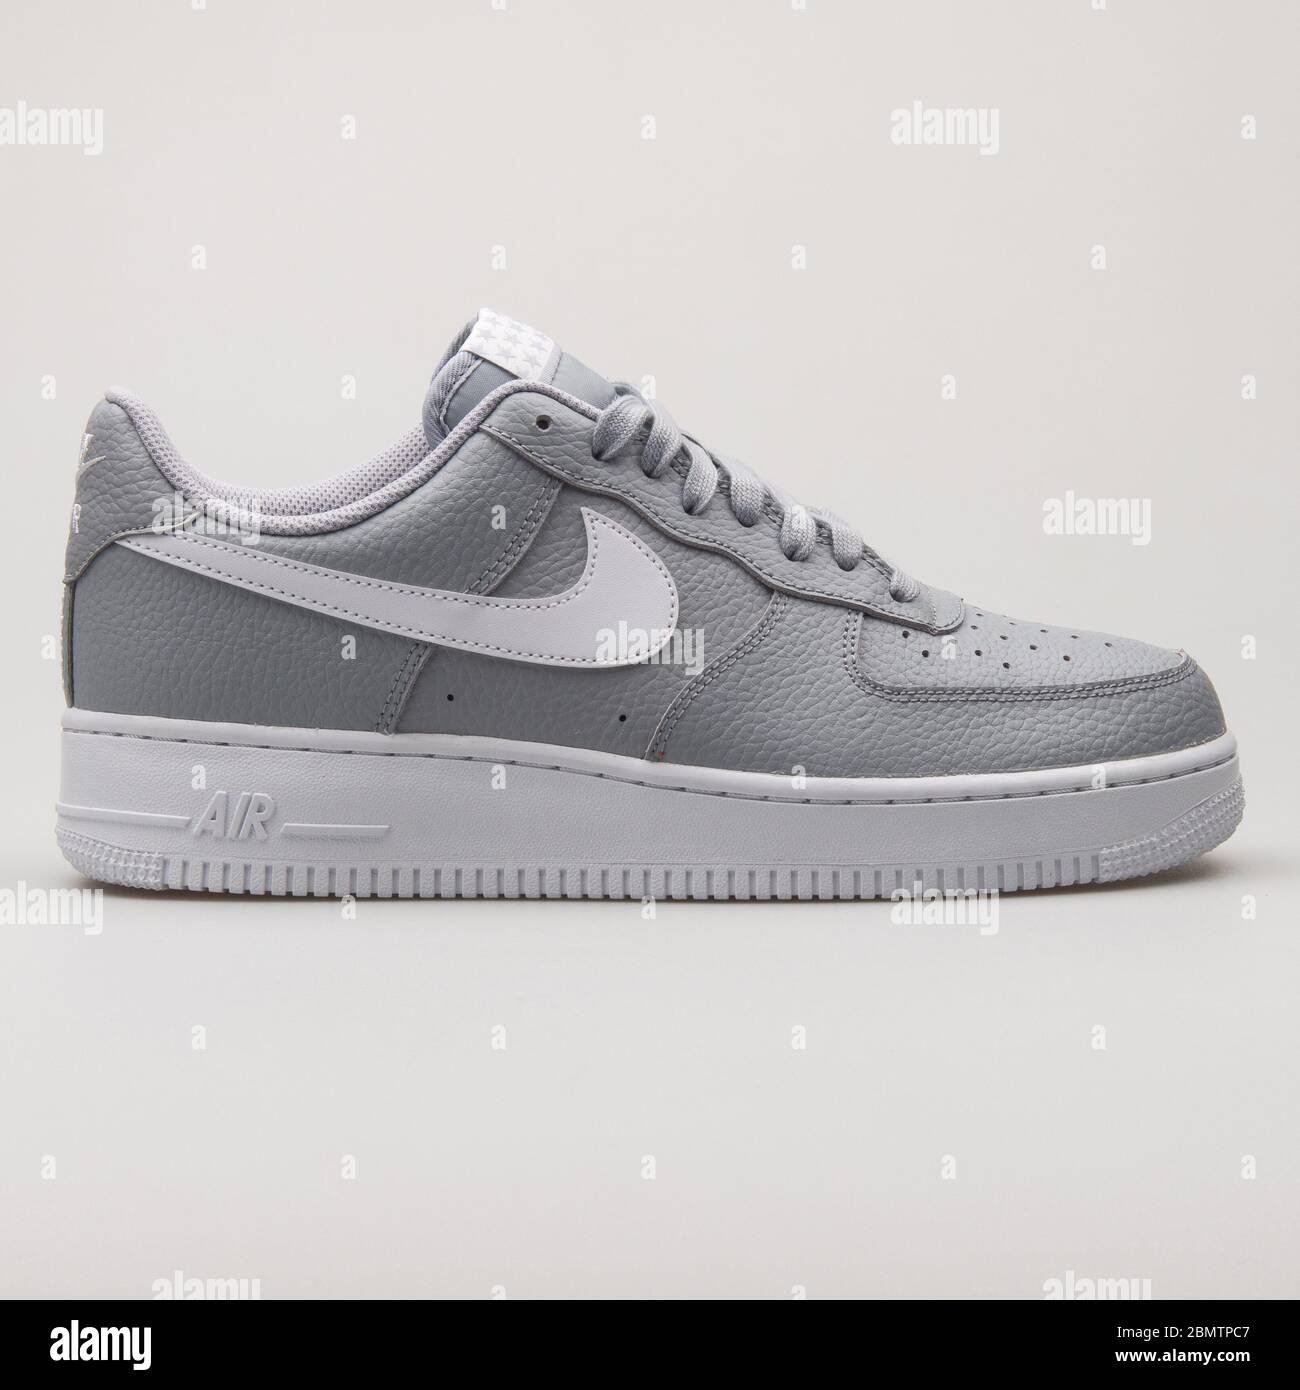 VIENNA, AUSTRIA - FEBRUARY 19, 2018: Nike Air Force 1 07 grey and white  sneaker on white background Stock Photo - Alamy